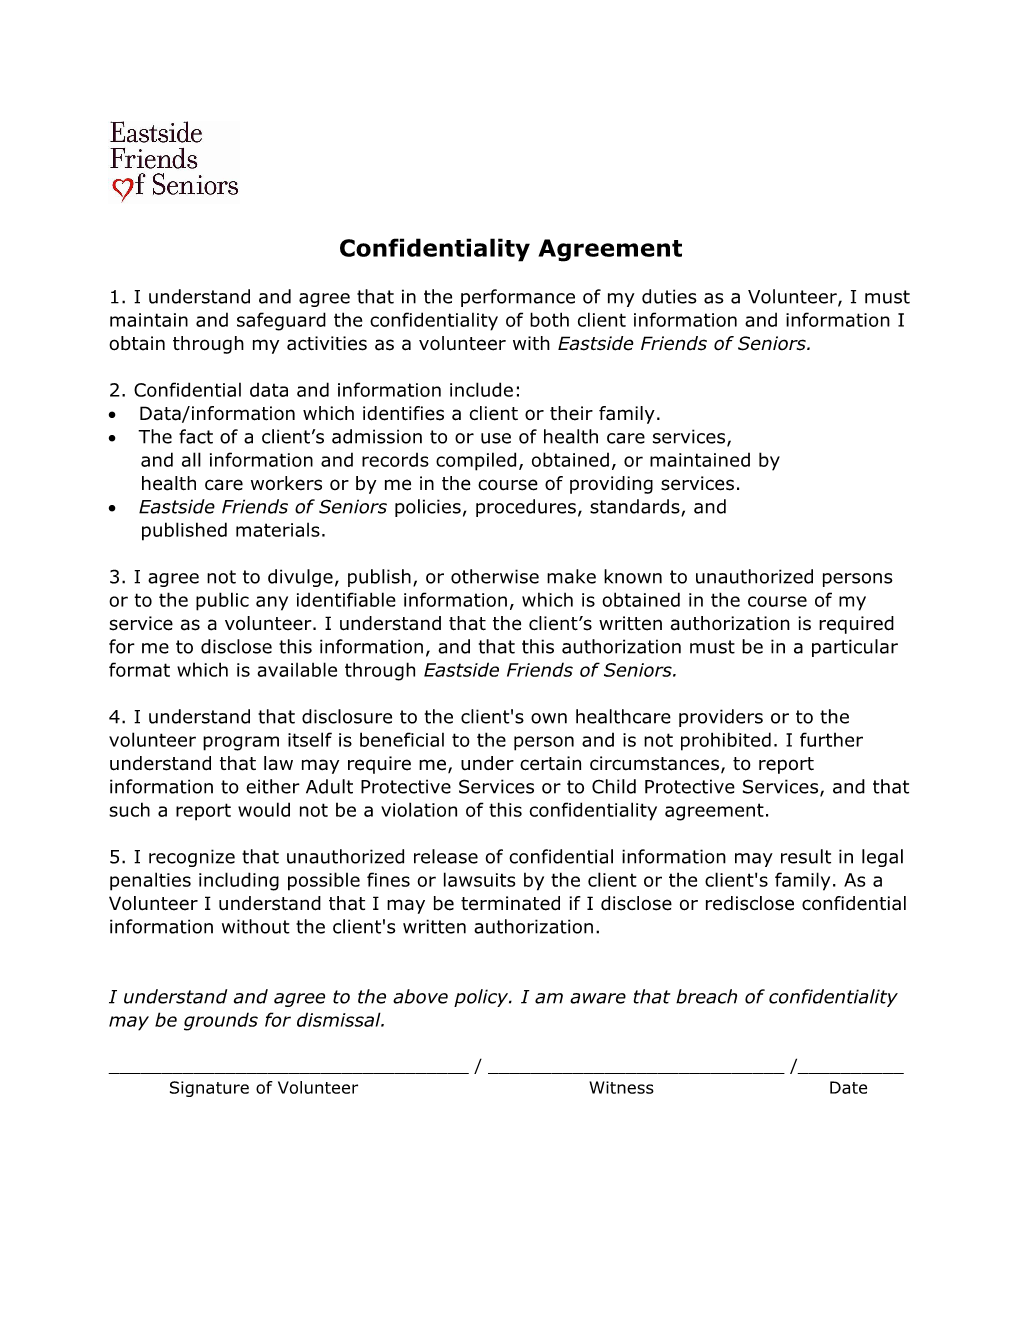 Confidentiality Agreement s3